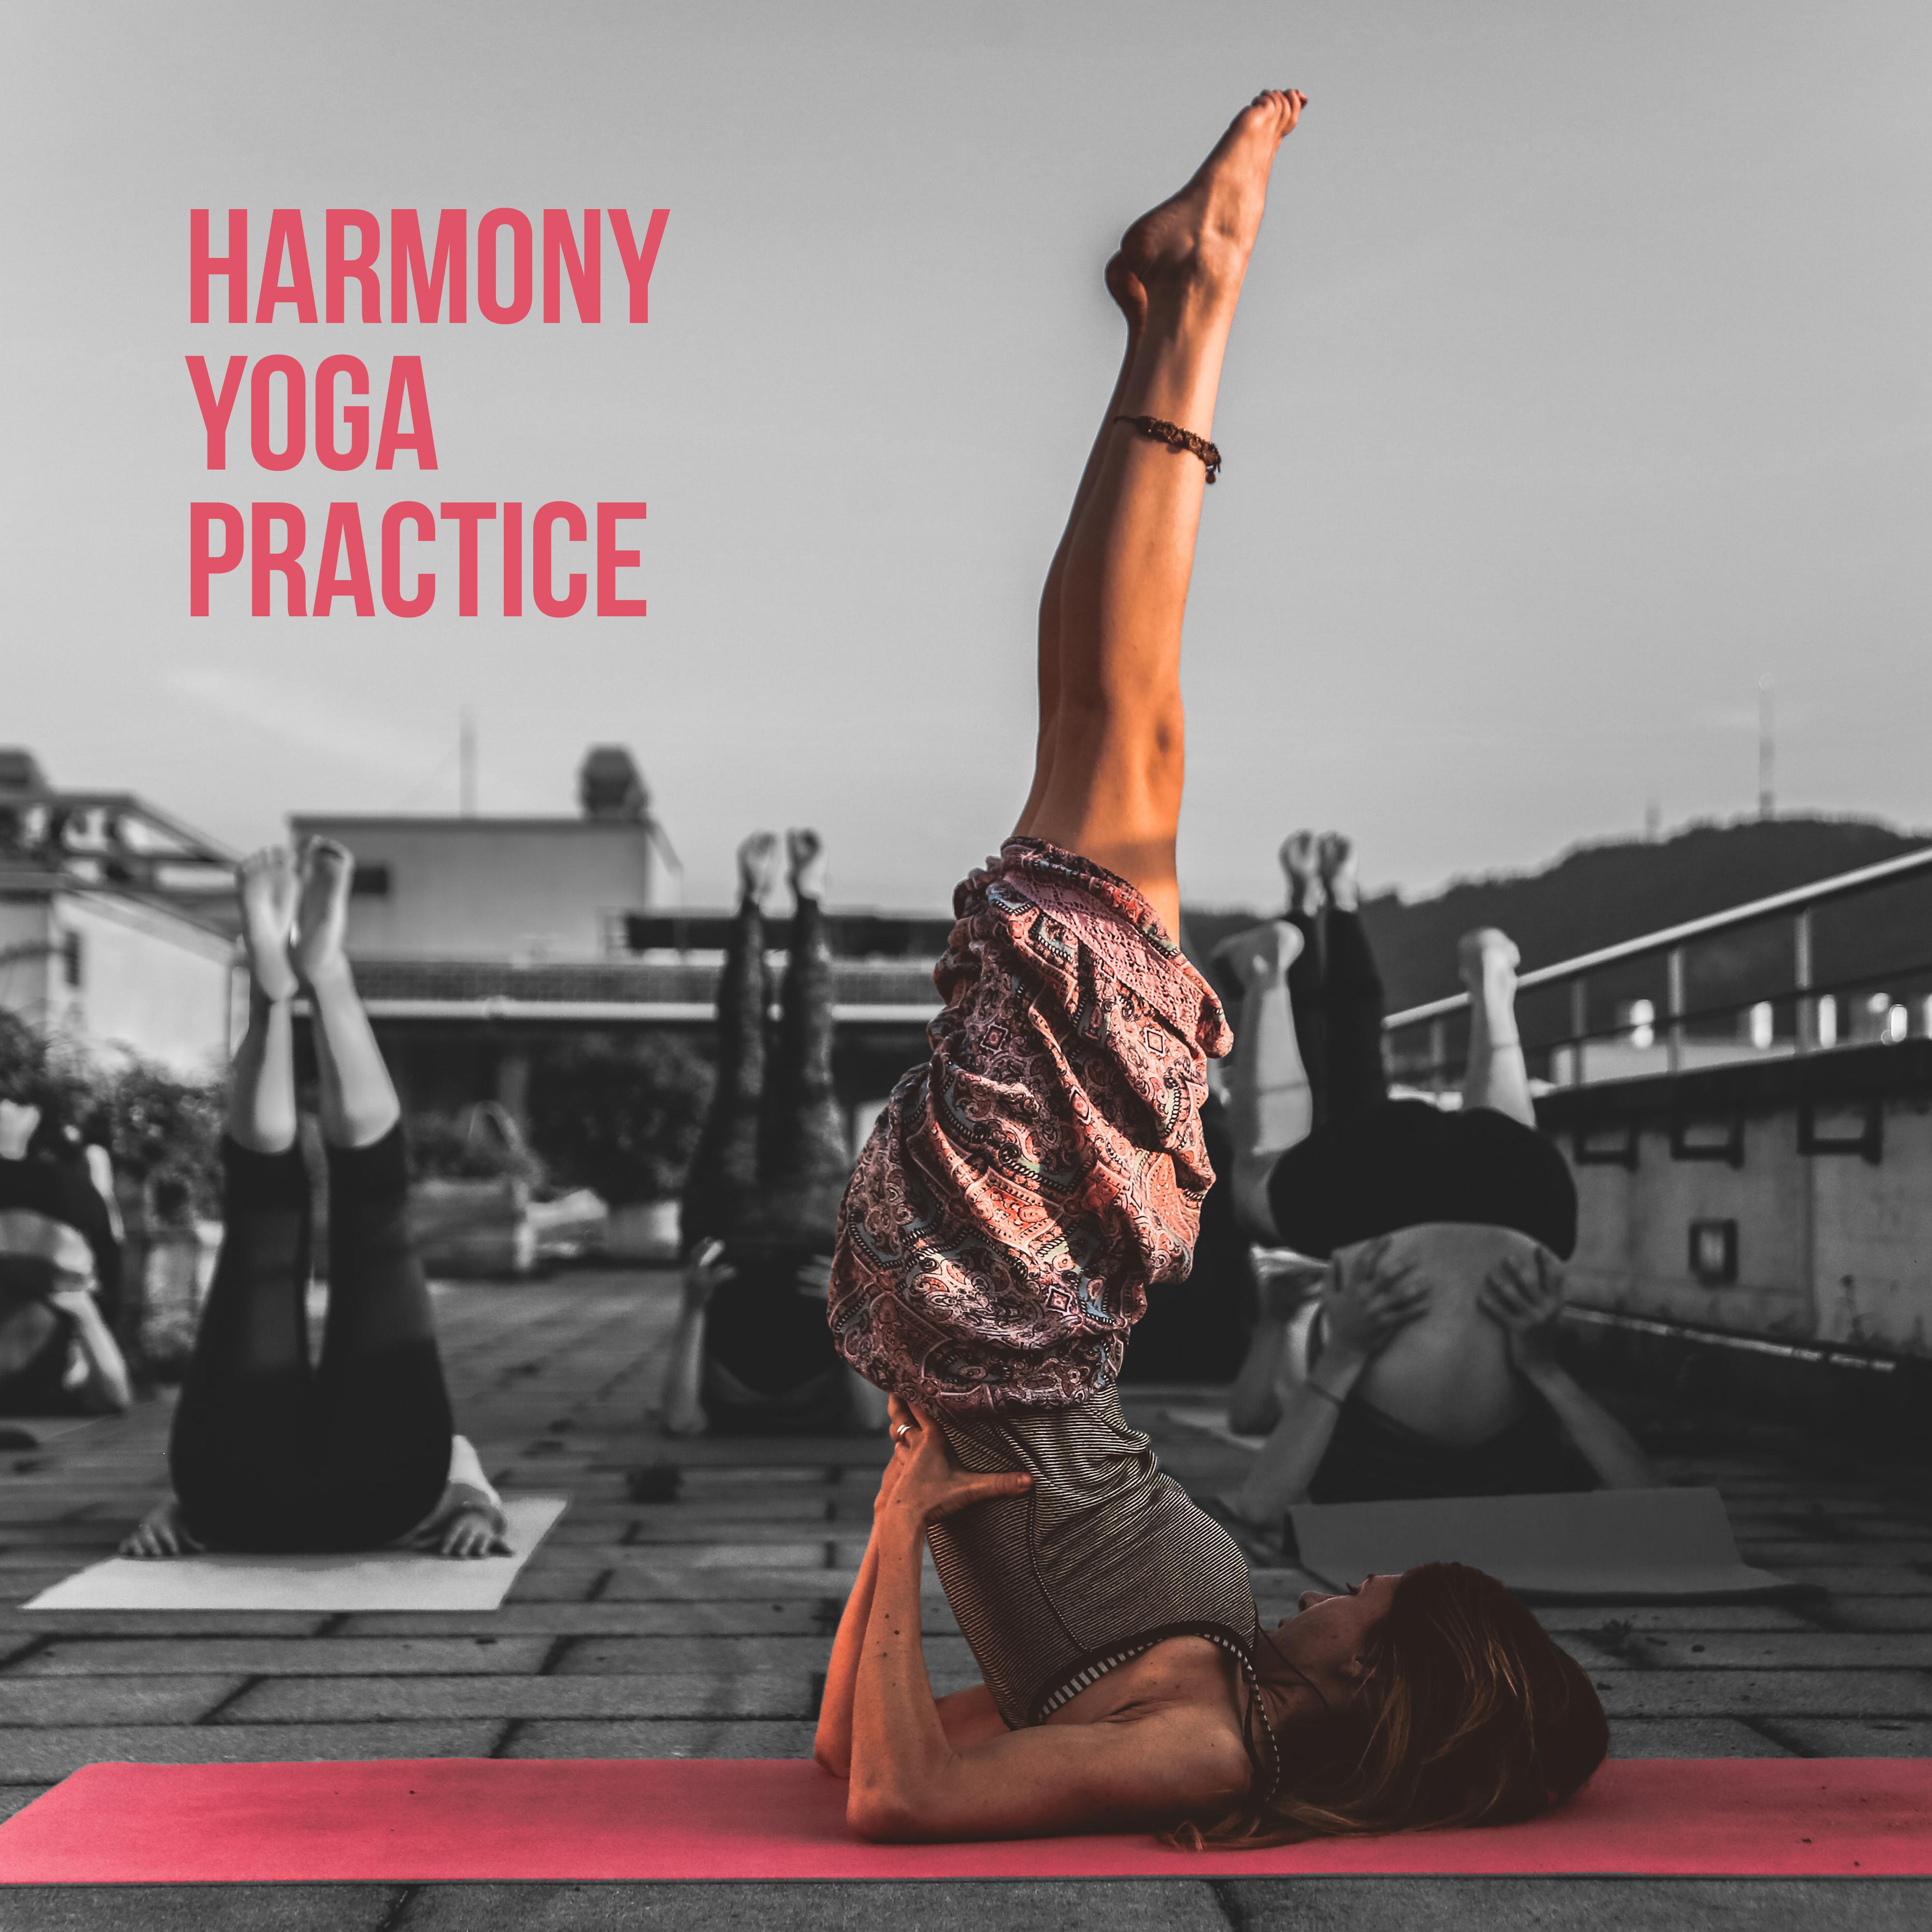 Harmony Yoga Practice – New Age Meditation & Relax Music, Mental Stimulation, Relaxing Mindfulness Sounds